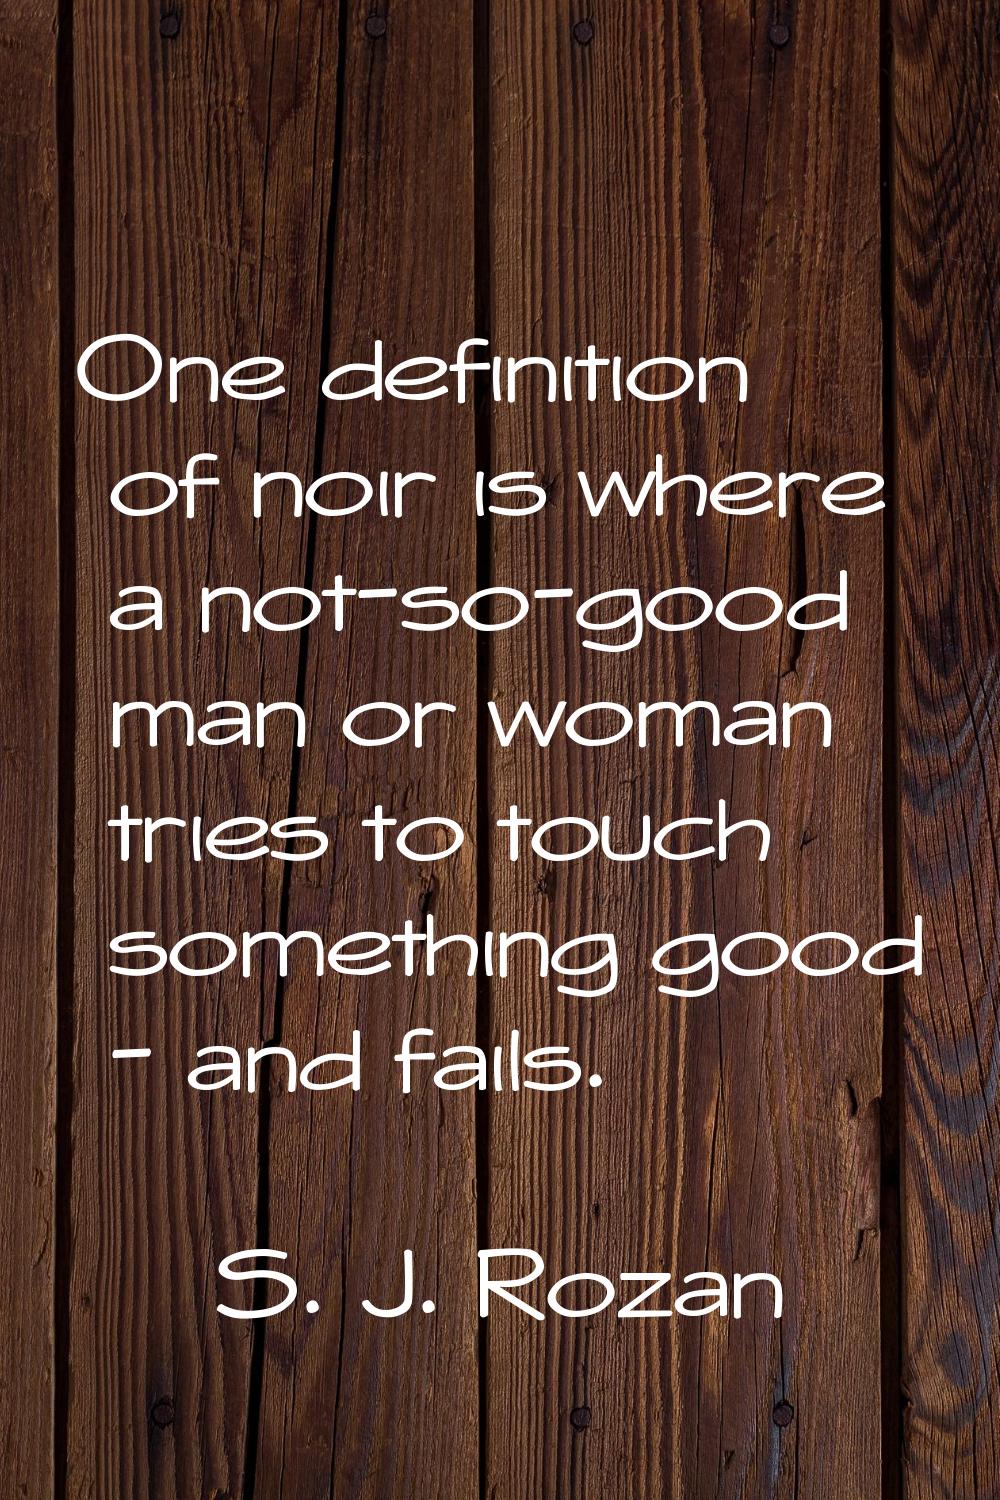 One definition of noir is where a not-so-good man or woman tries to touch something good - and fail